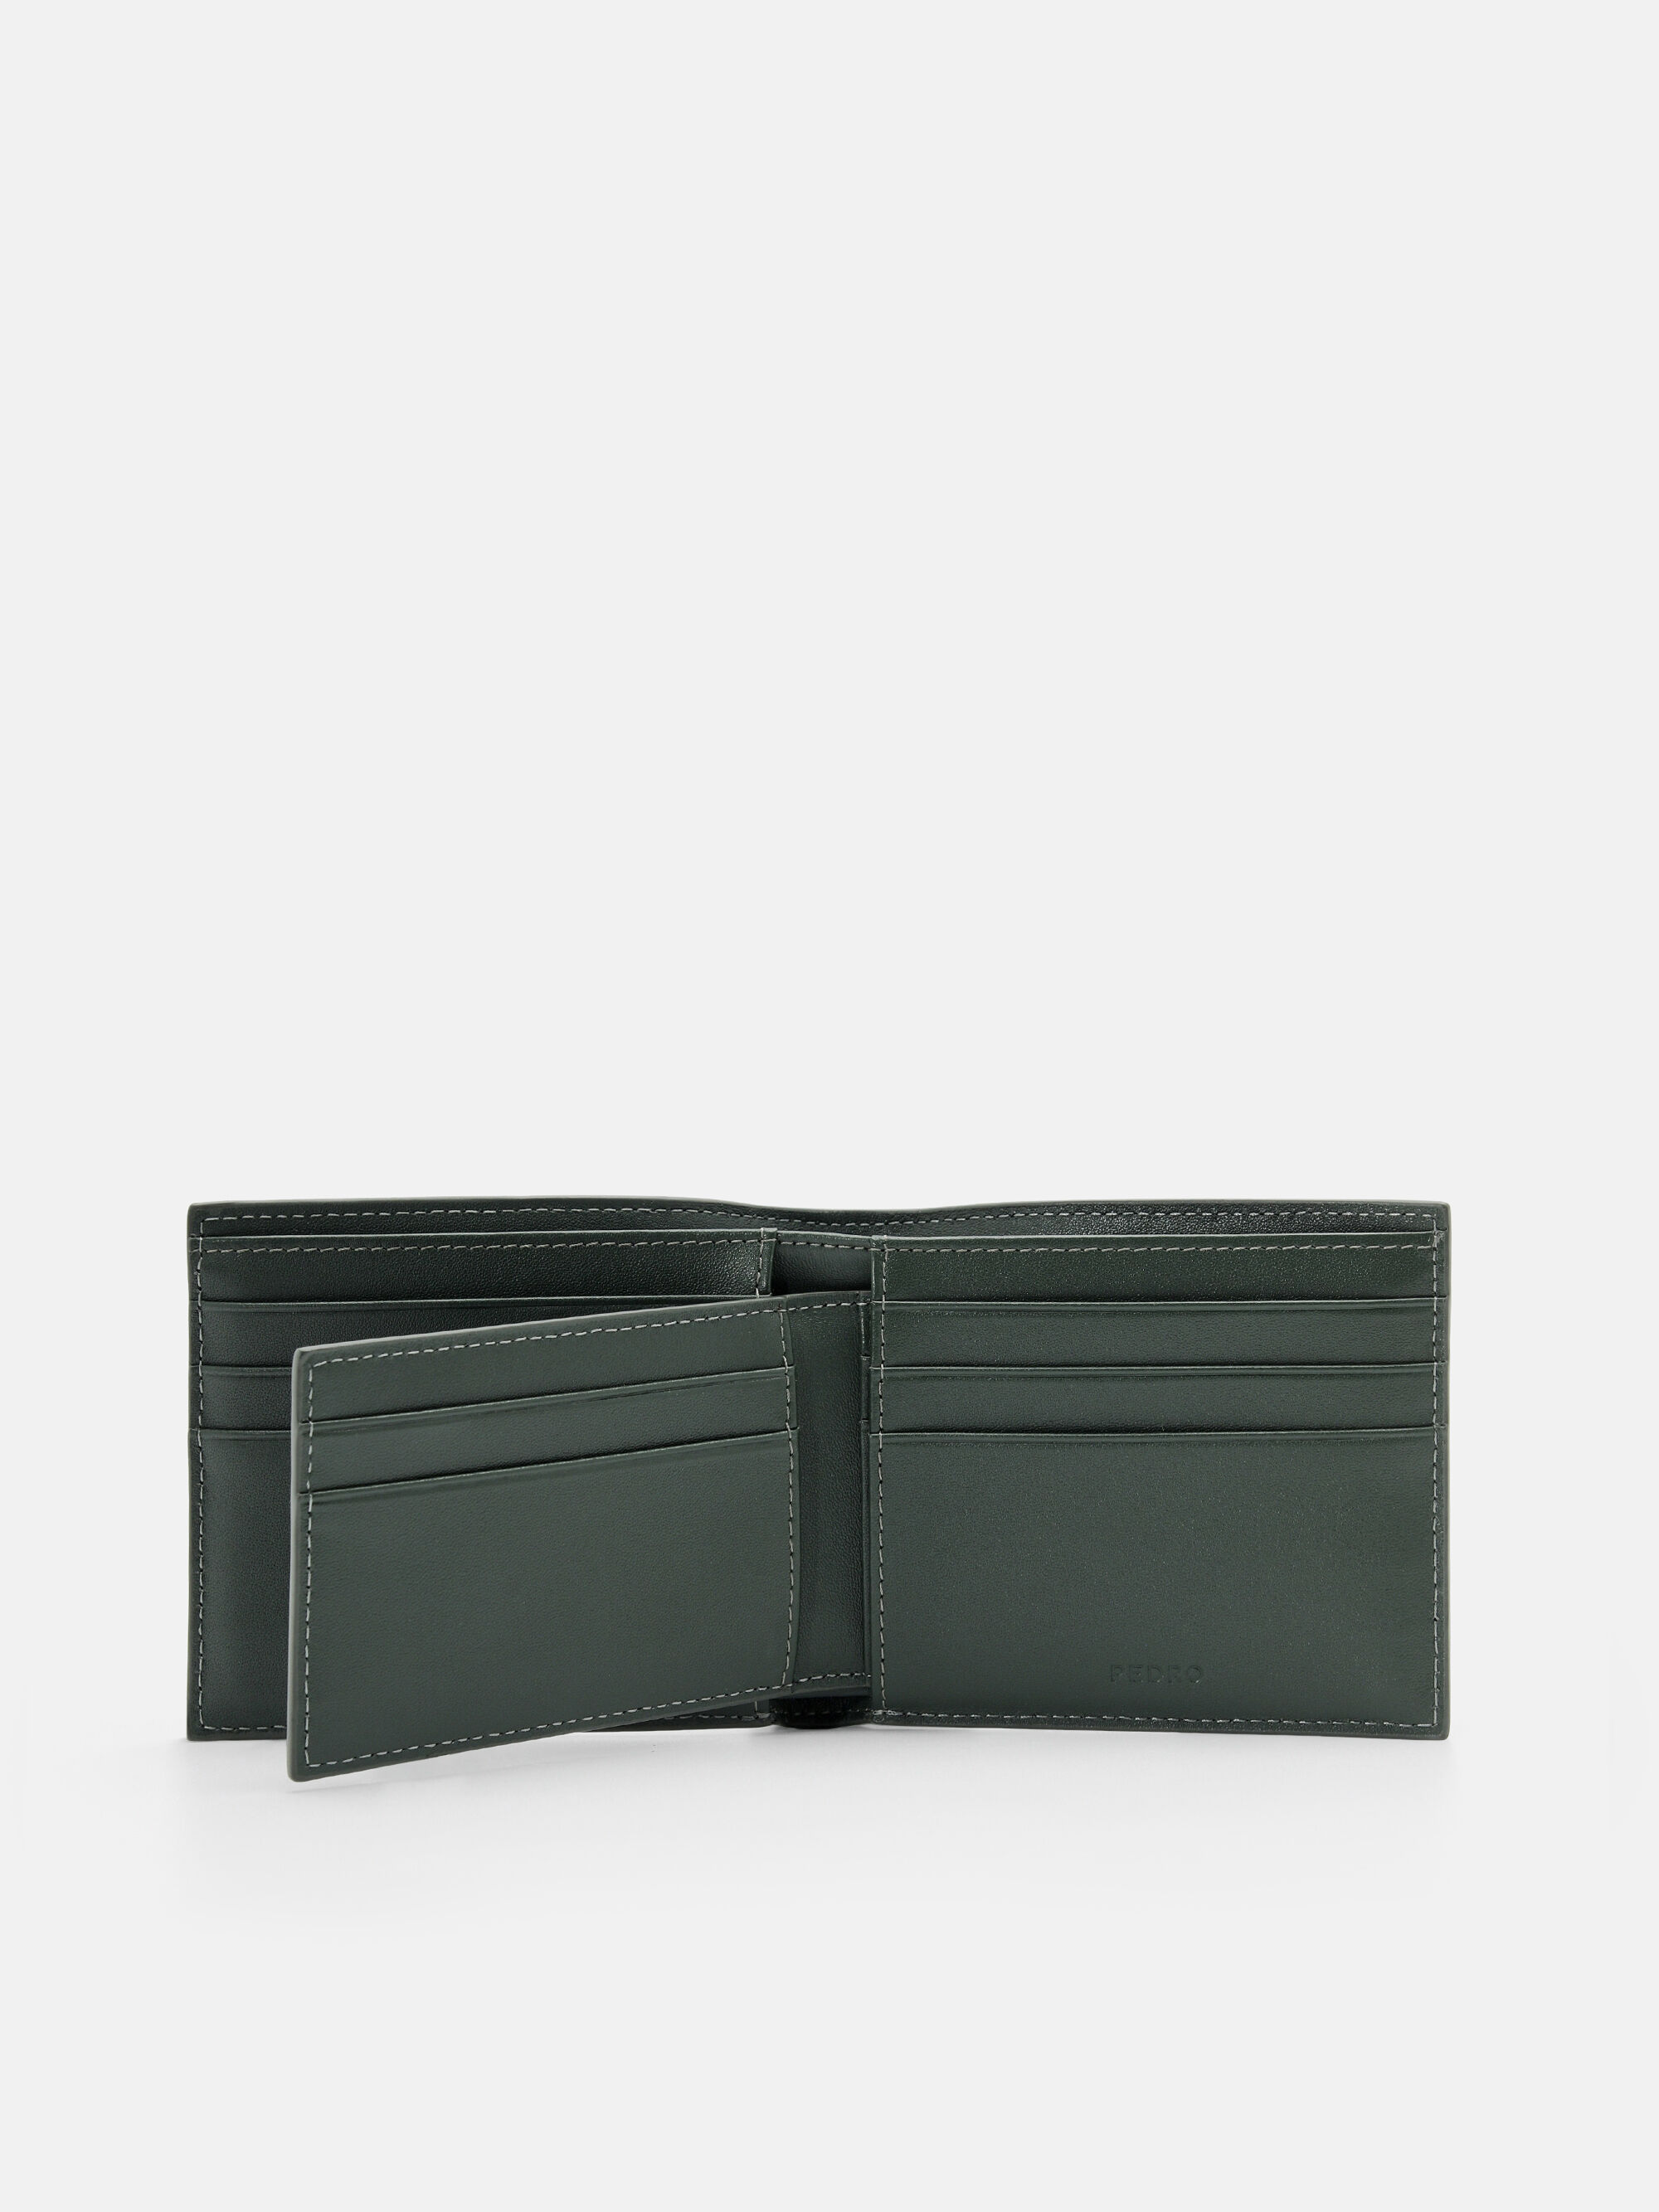 Oliver Leather Bi-Fold Wallet with Insert, Military Green